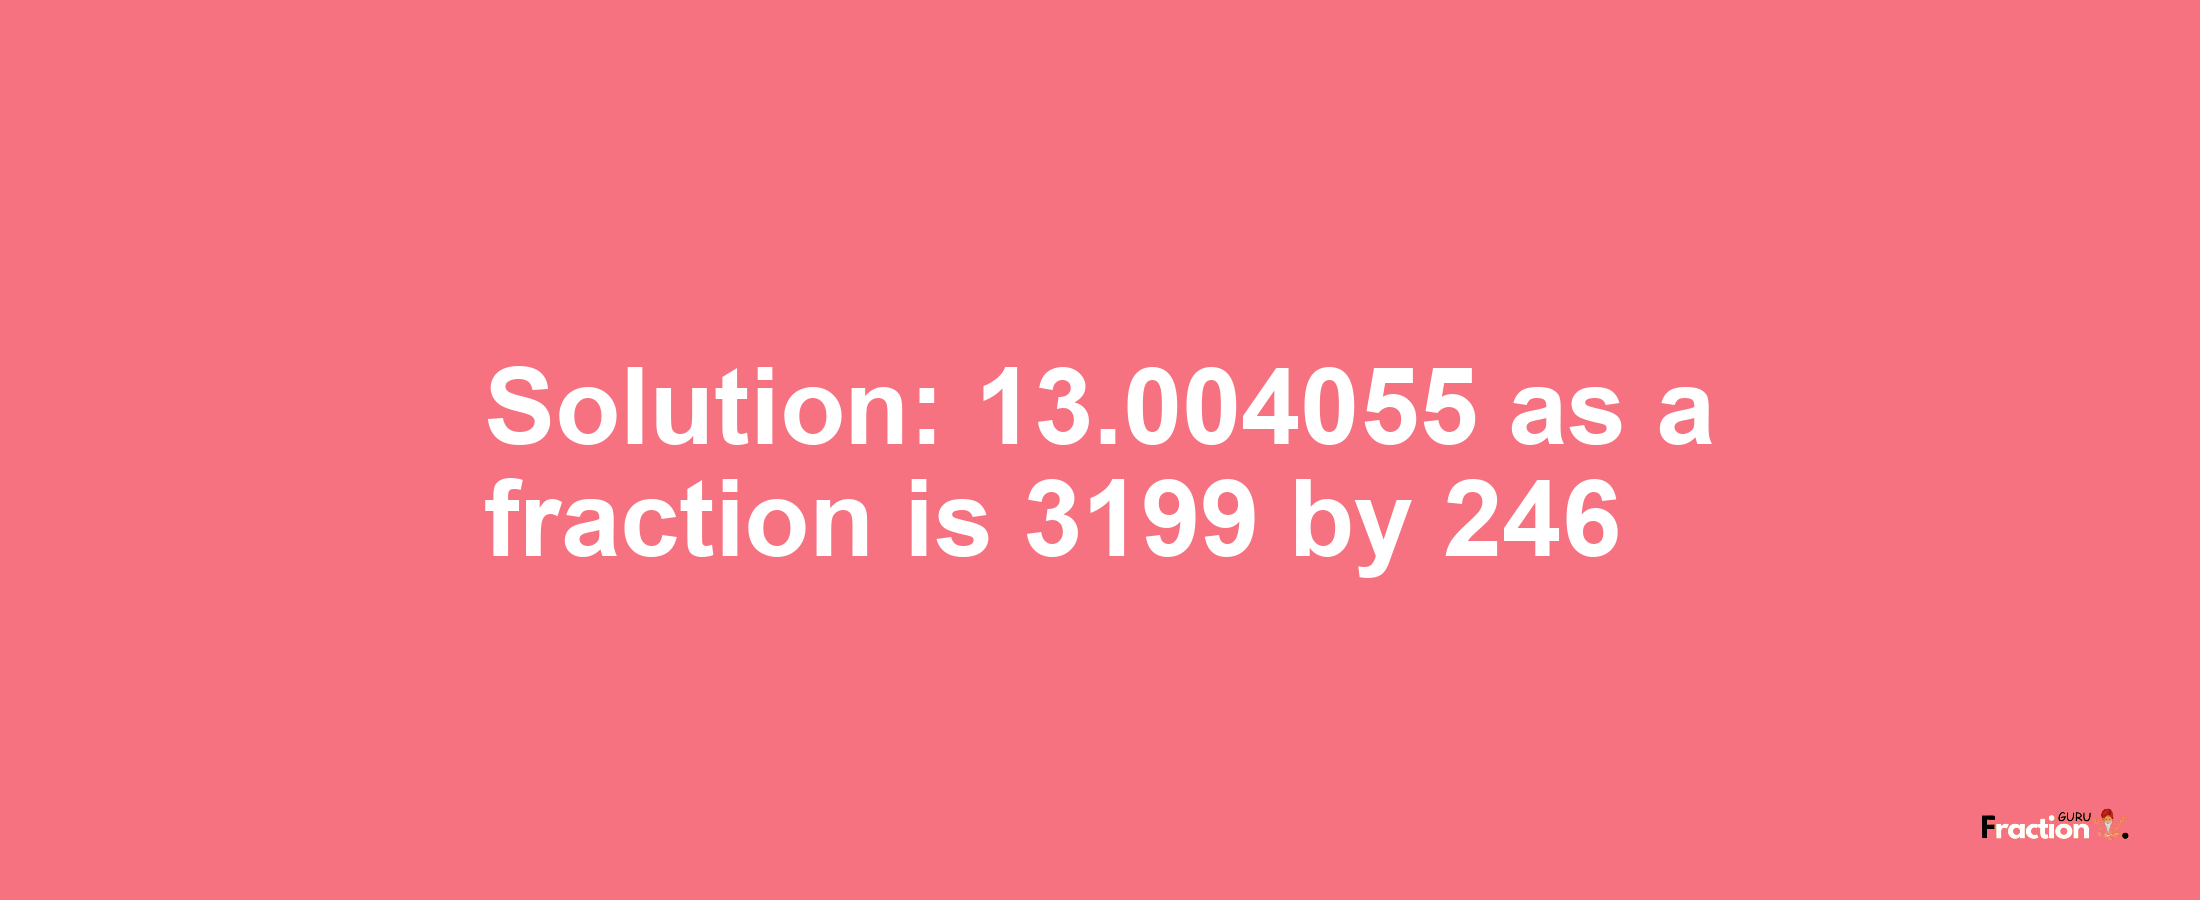 Solution:13.004055 as a fraction is 3199/246